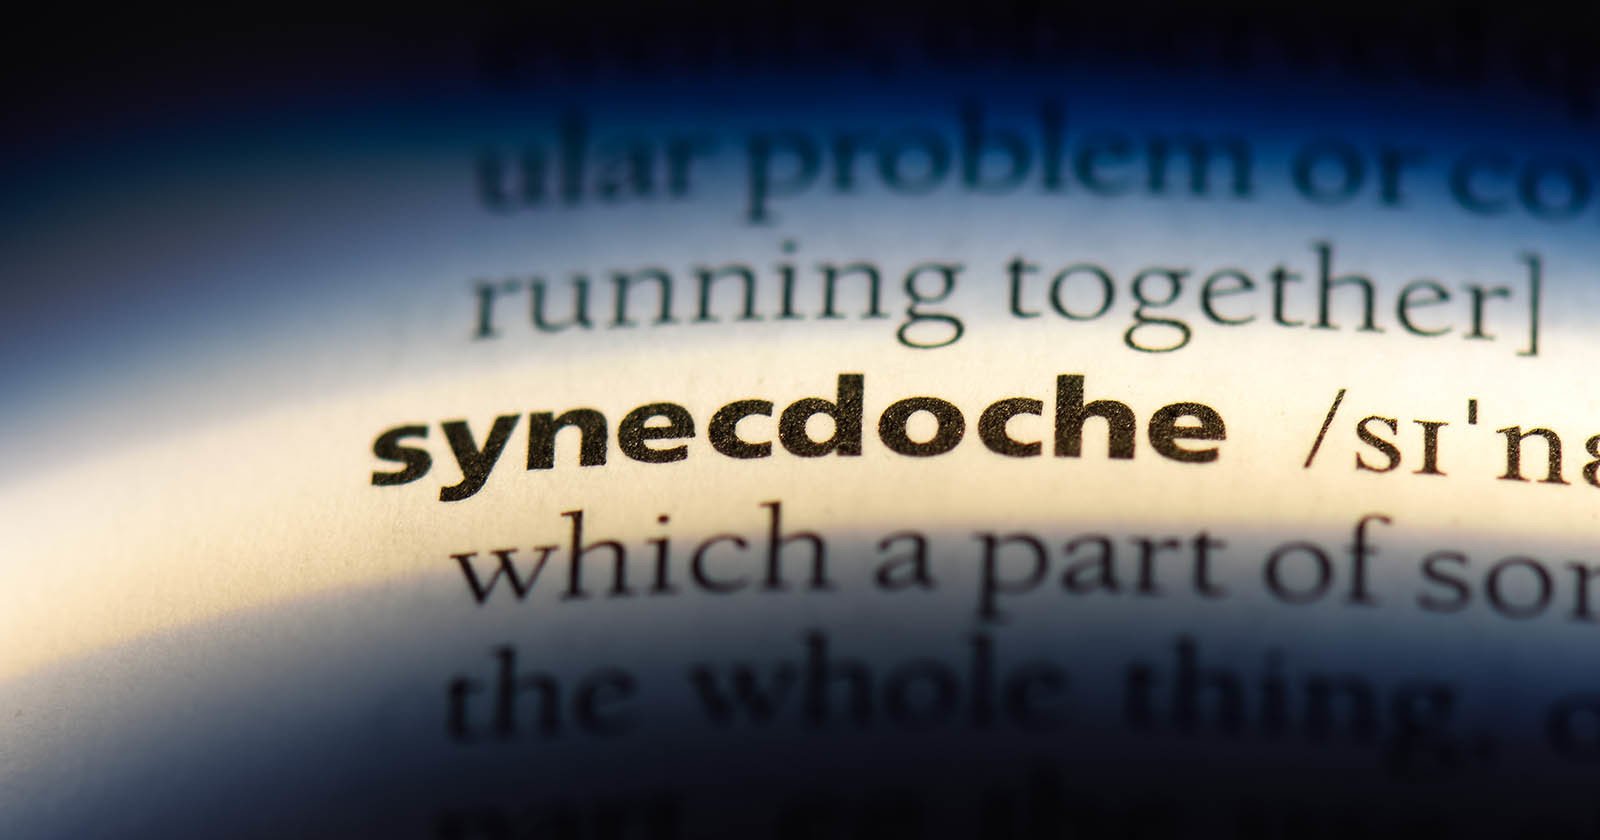 Synecdoche: The Essence of Photography